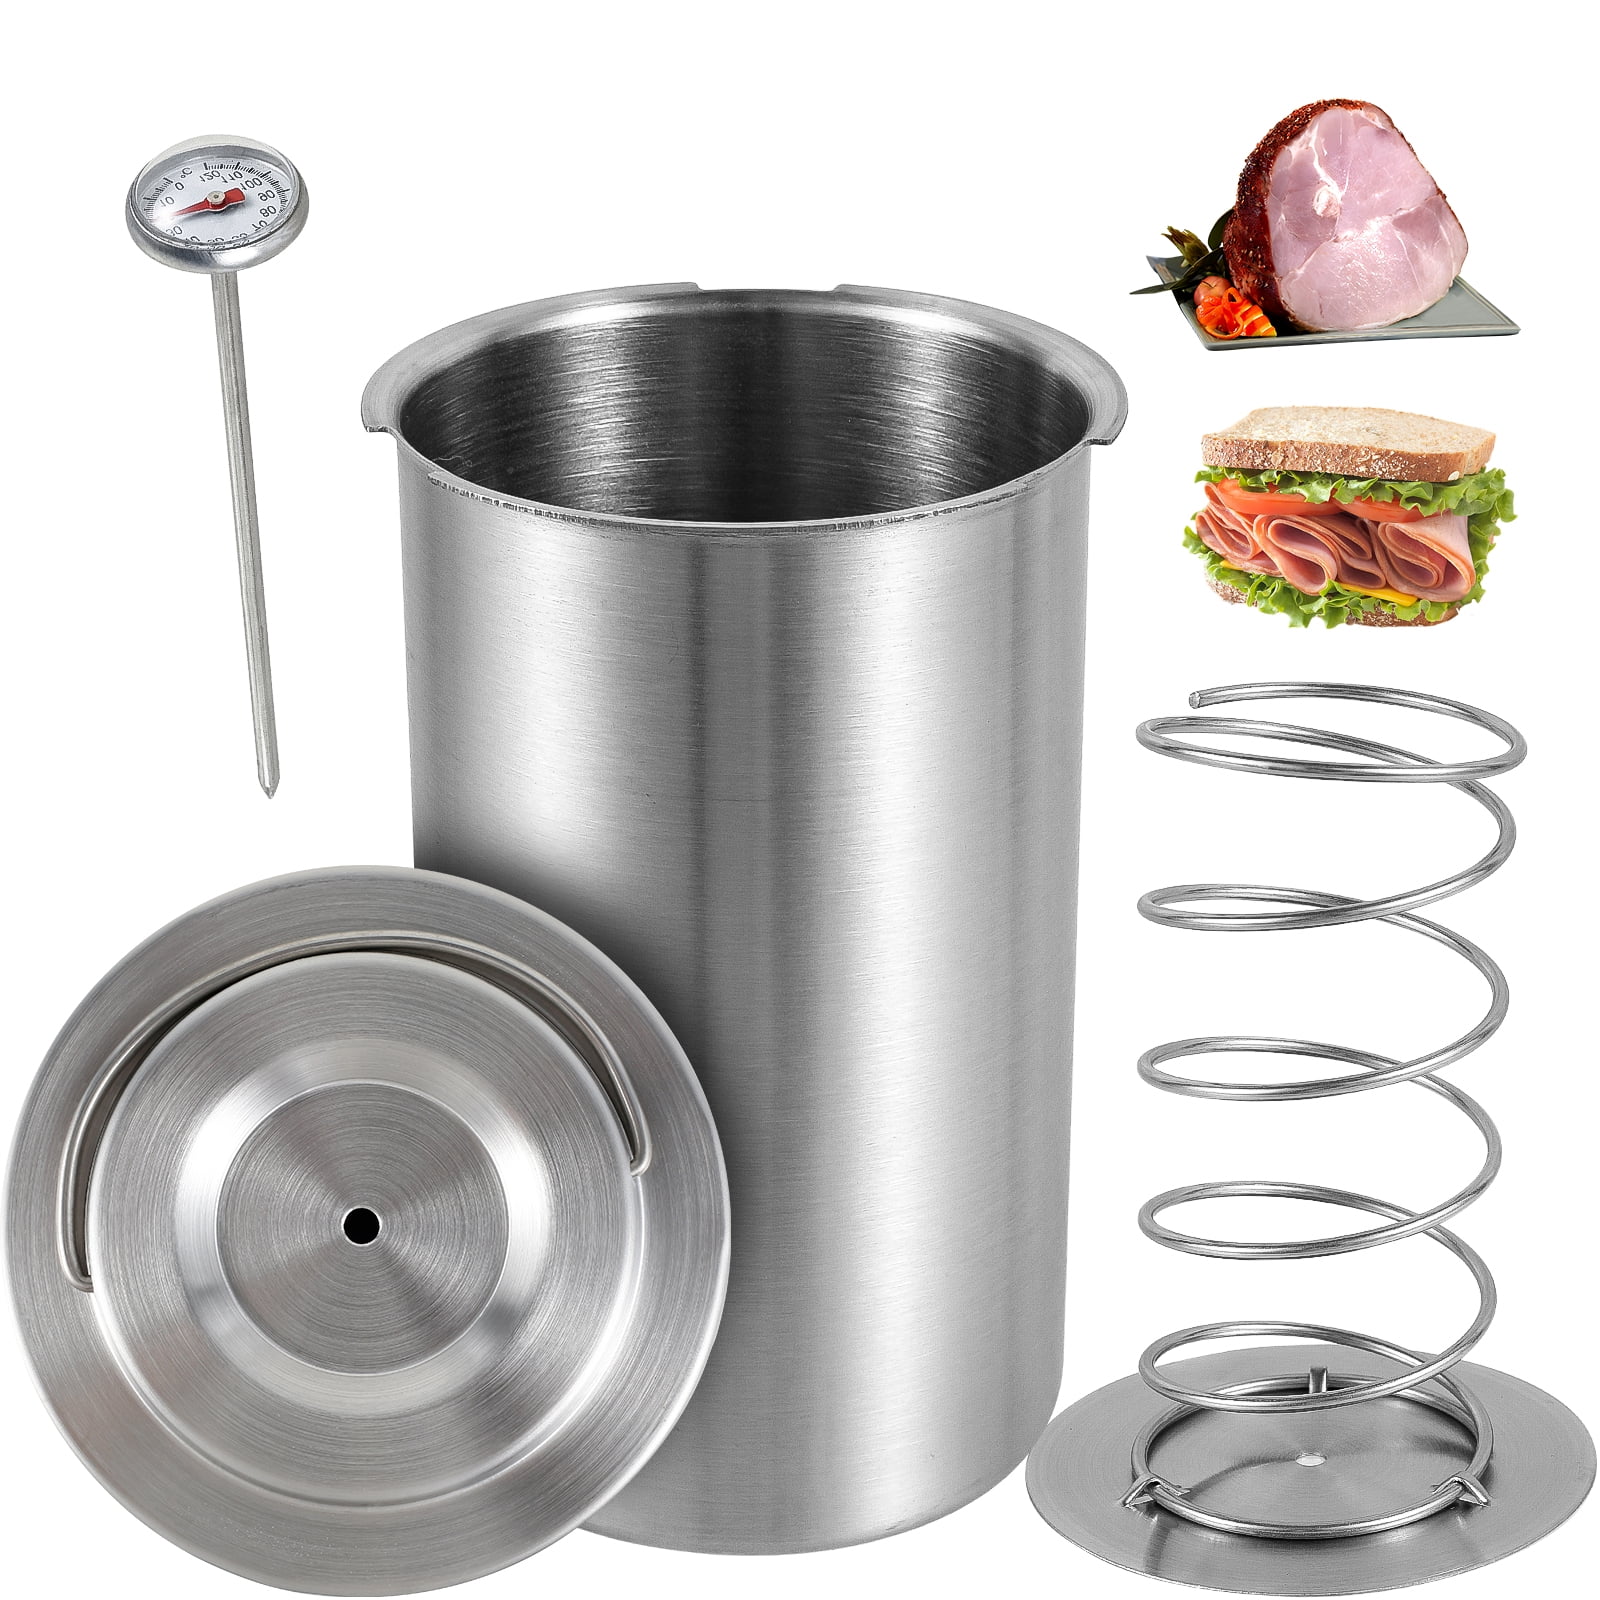 Press Ham Maker, Stainless Steel Ham Sandwich Meat Press Maker for Making  Healthy Homemade Deli Meat with Thermometer and Recipes, Seafood Meat